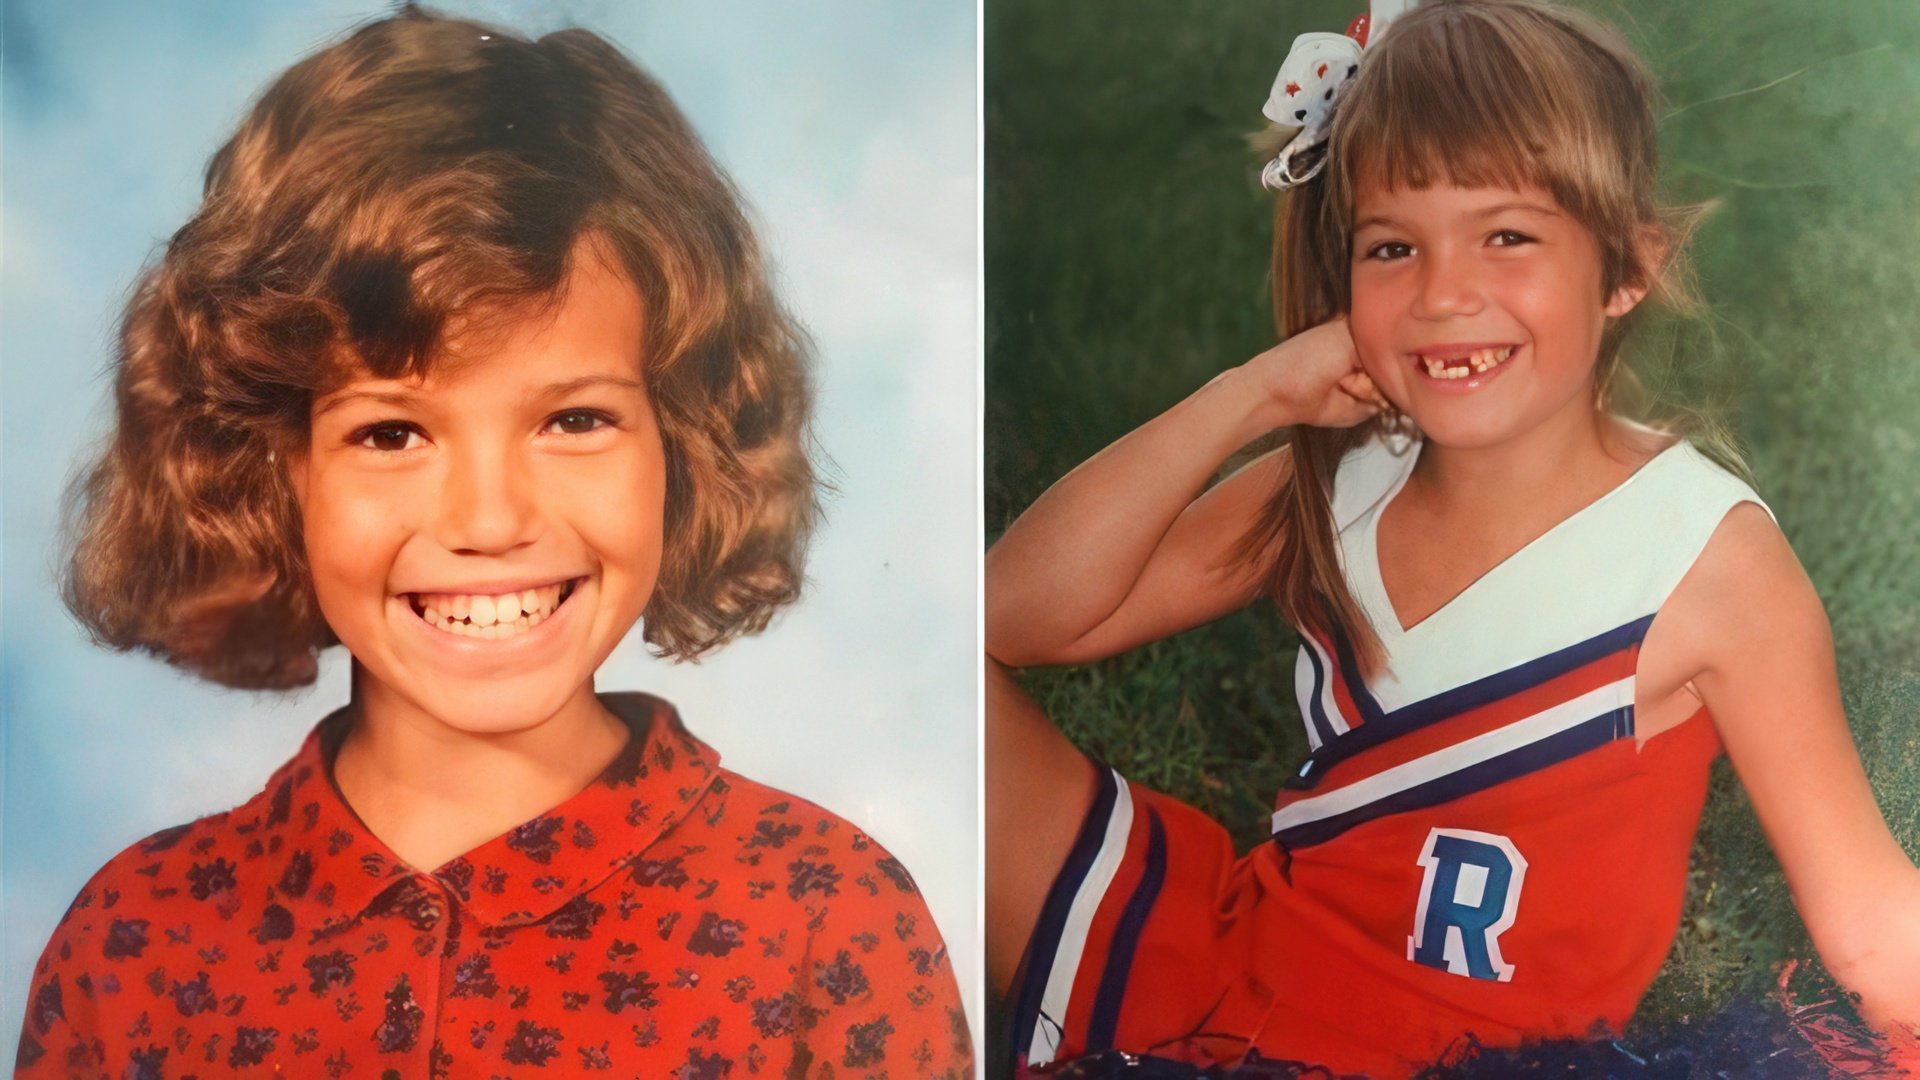 Mandy Moore as a child